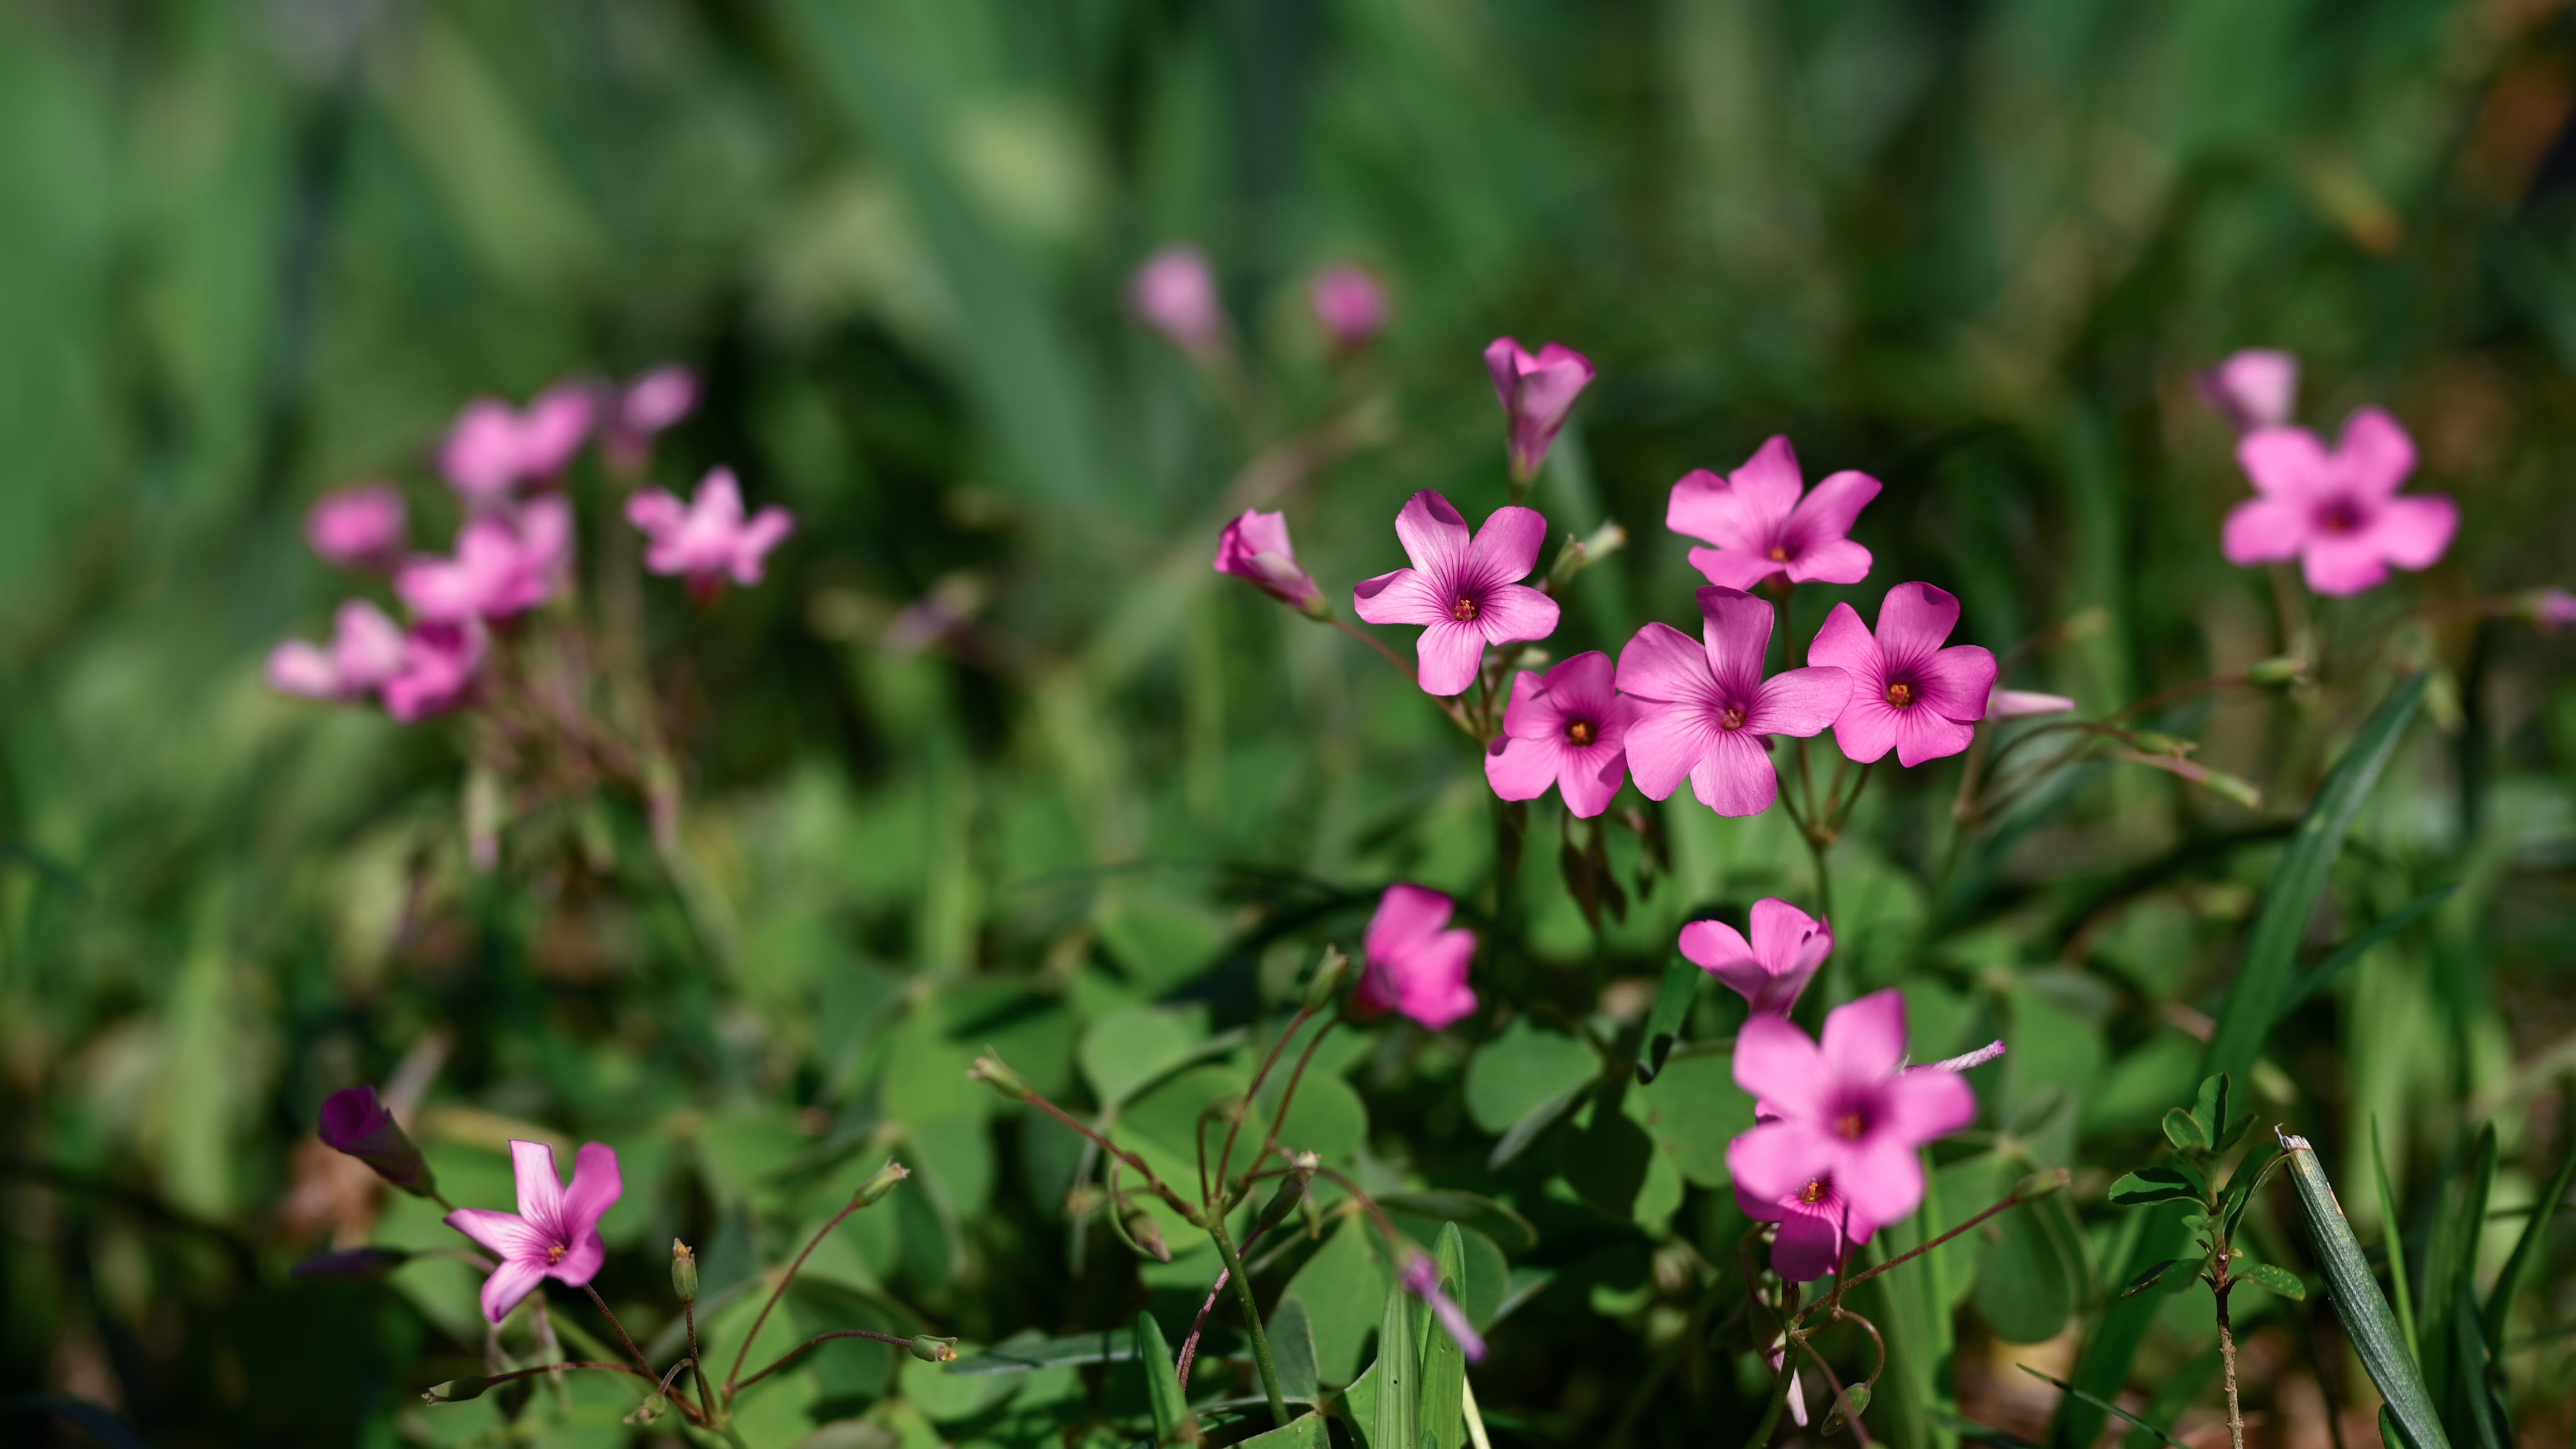 General 4640x2610 photography nature flowers plants spring pink outdoors closeup